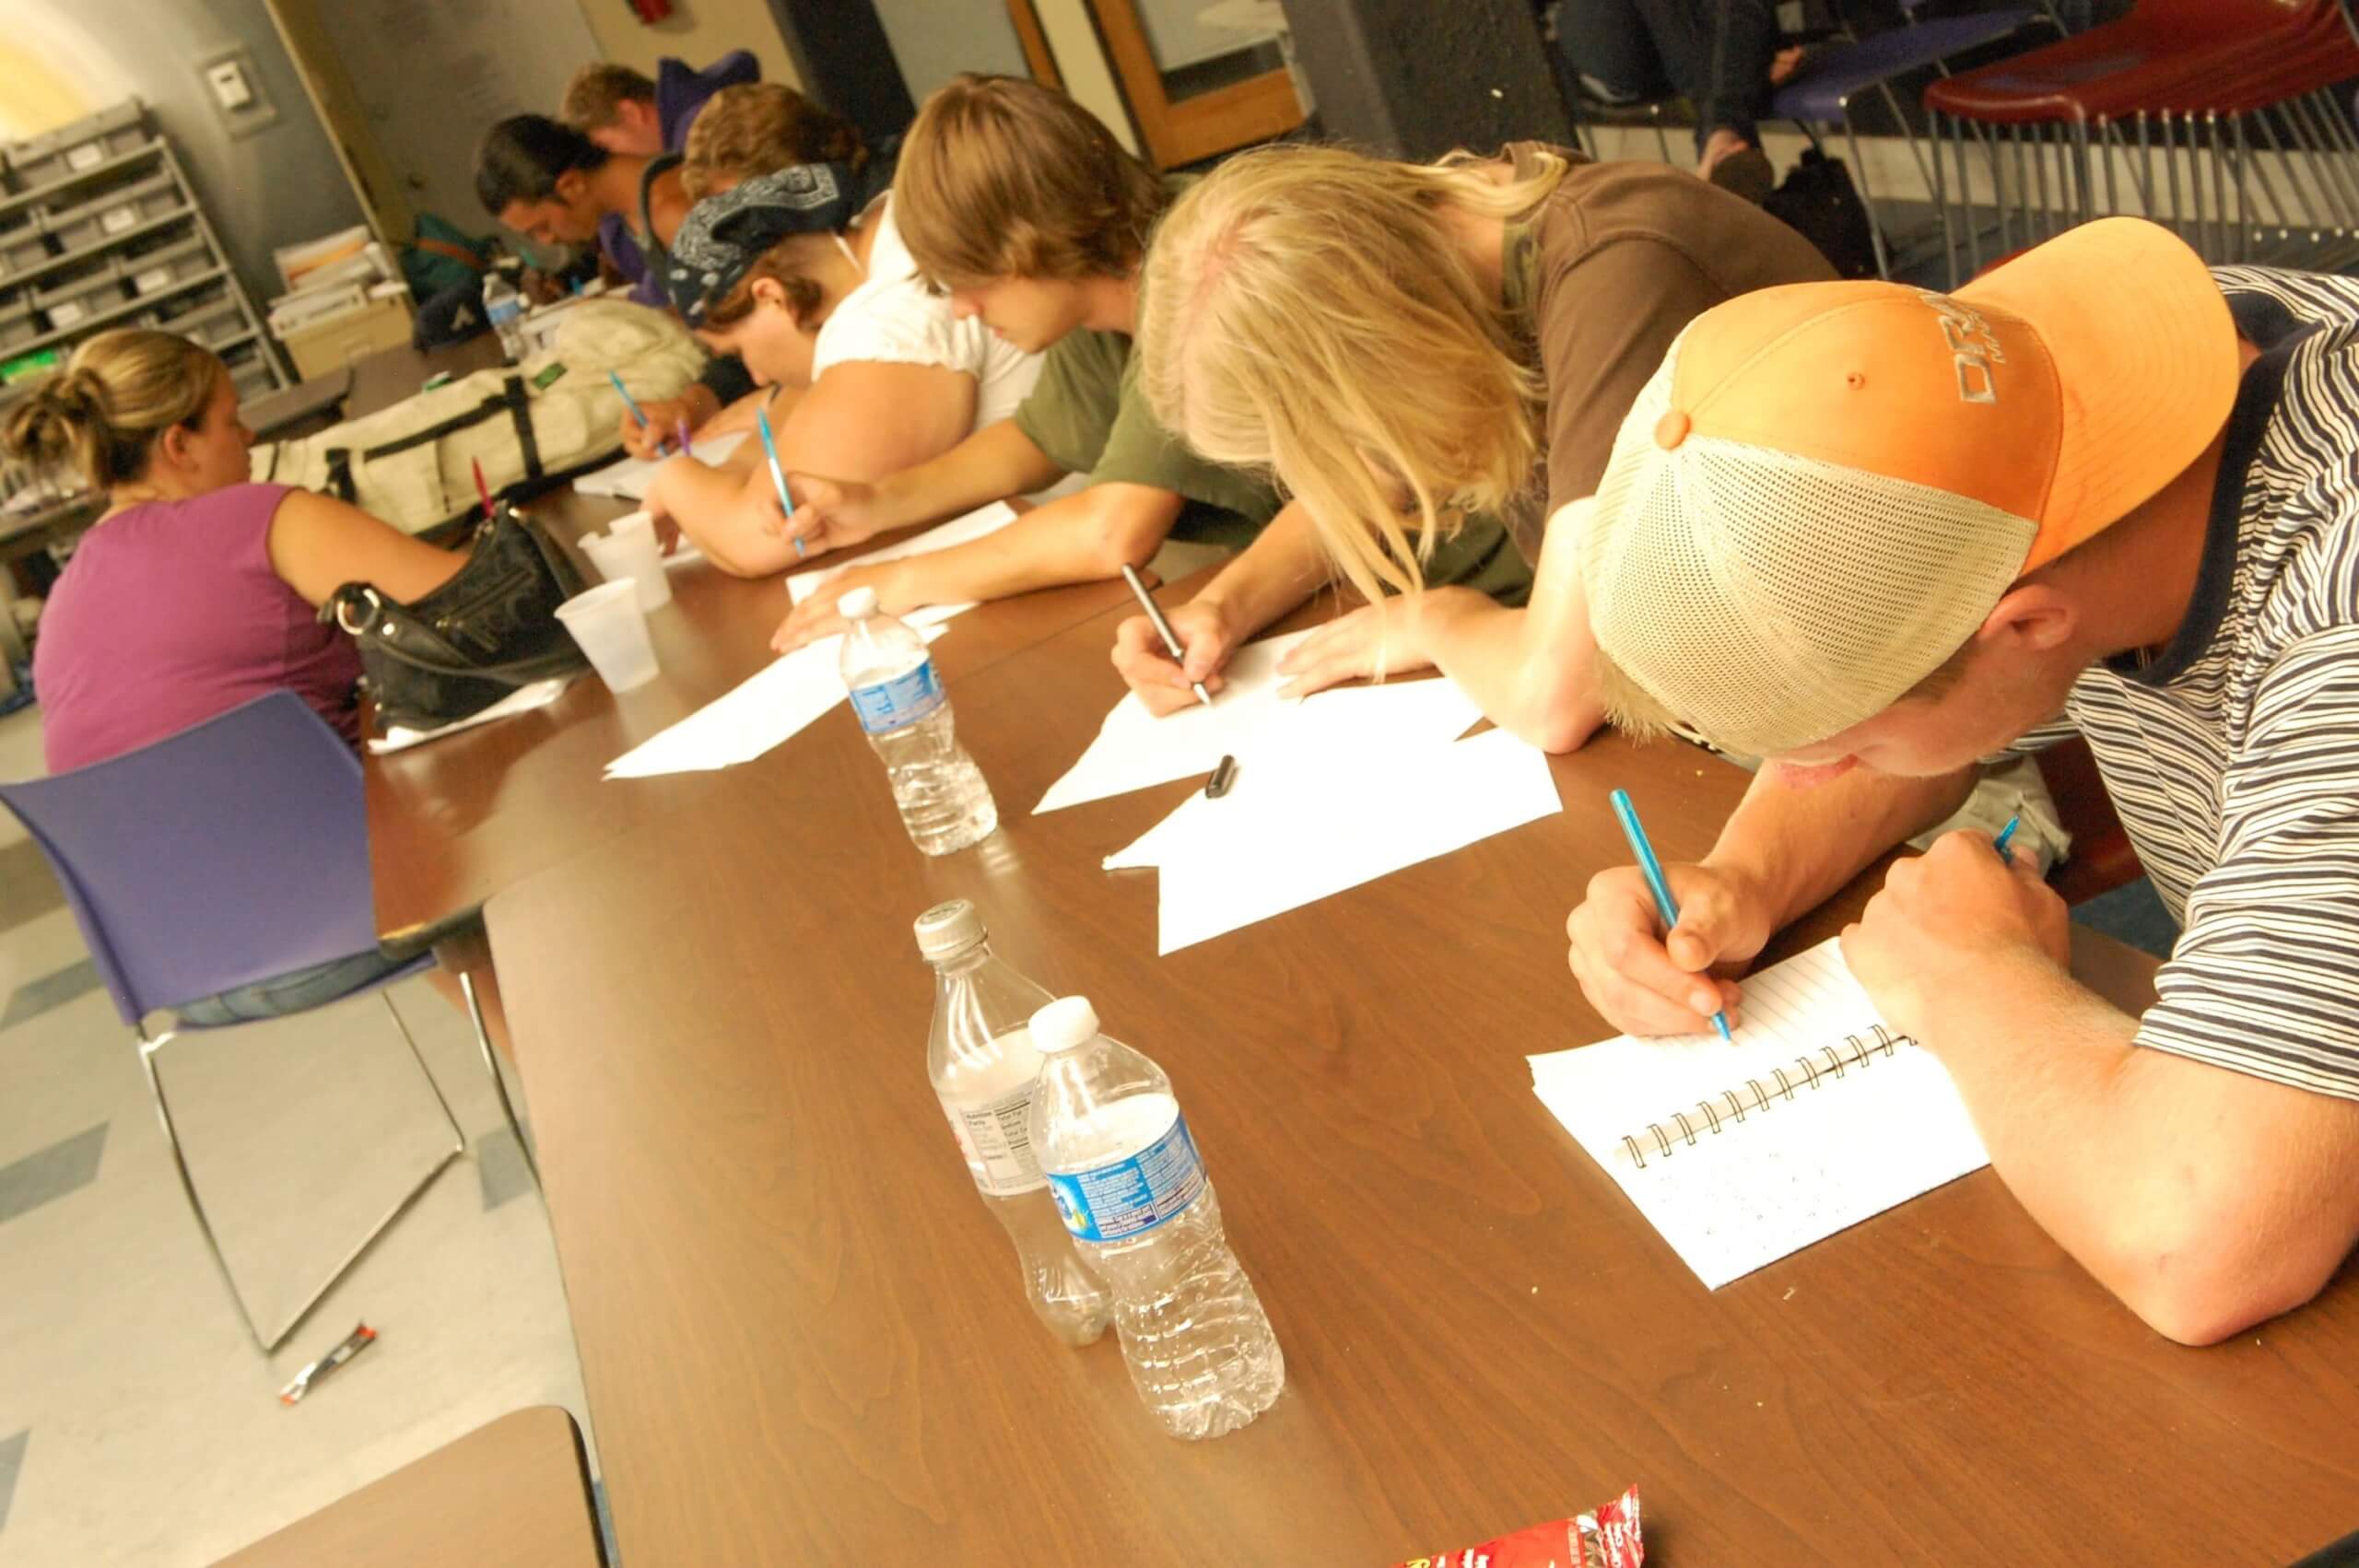 Group of youth writing